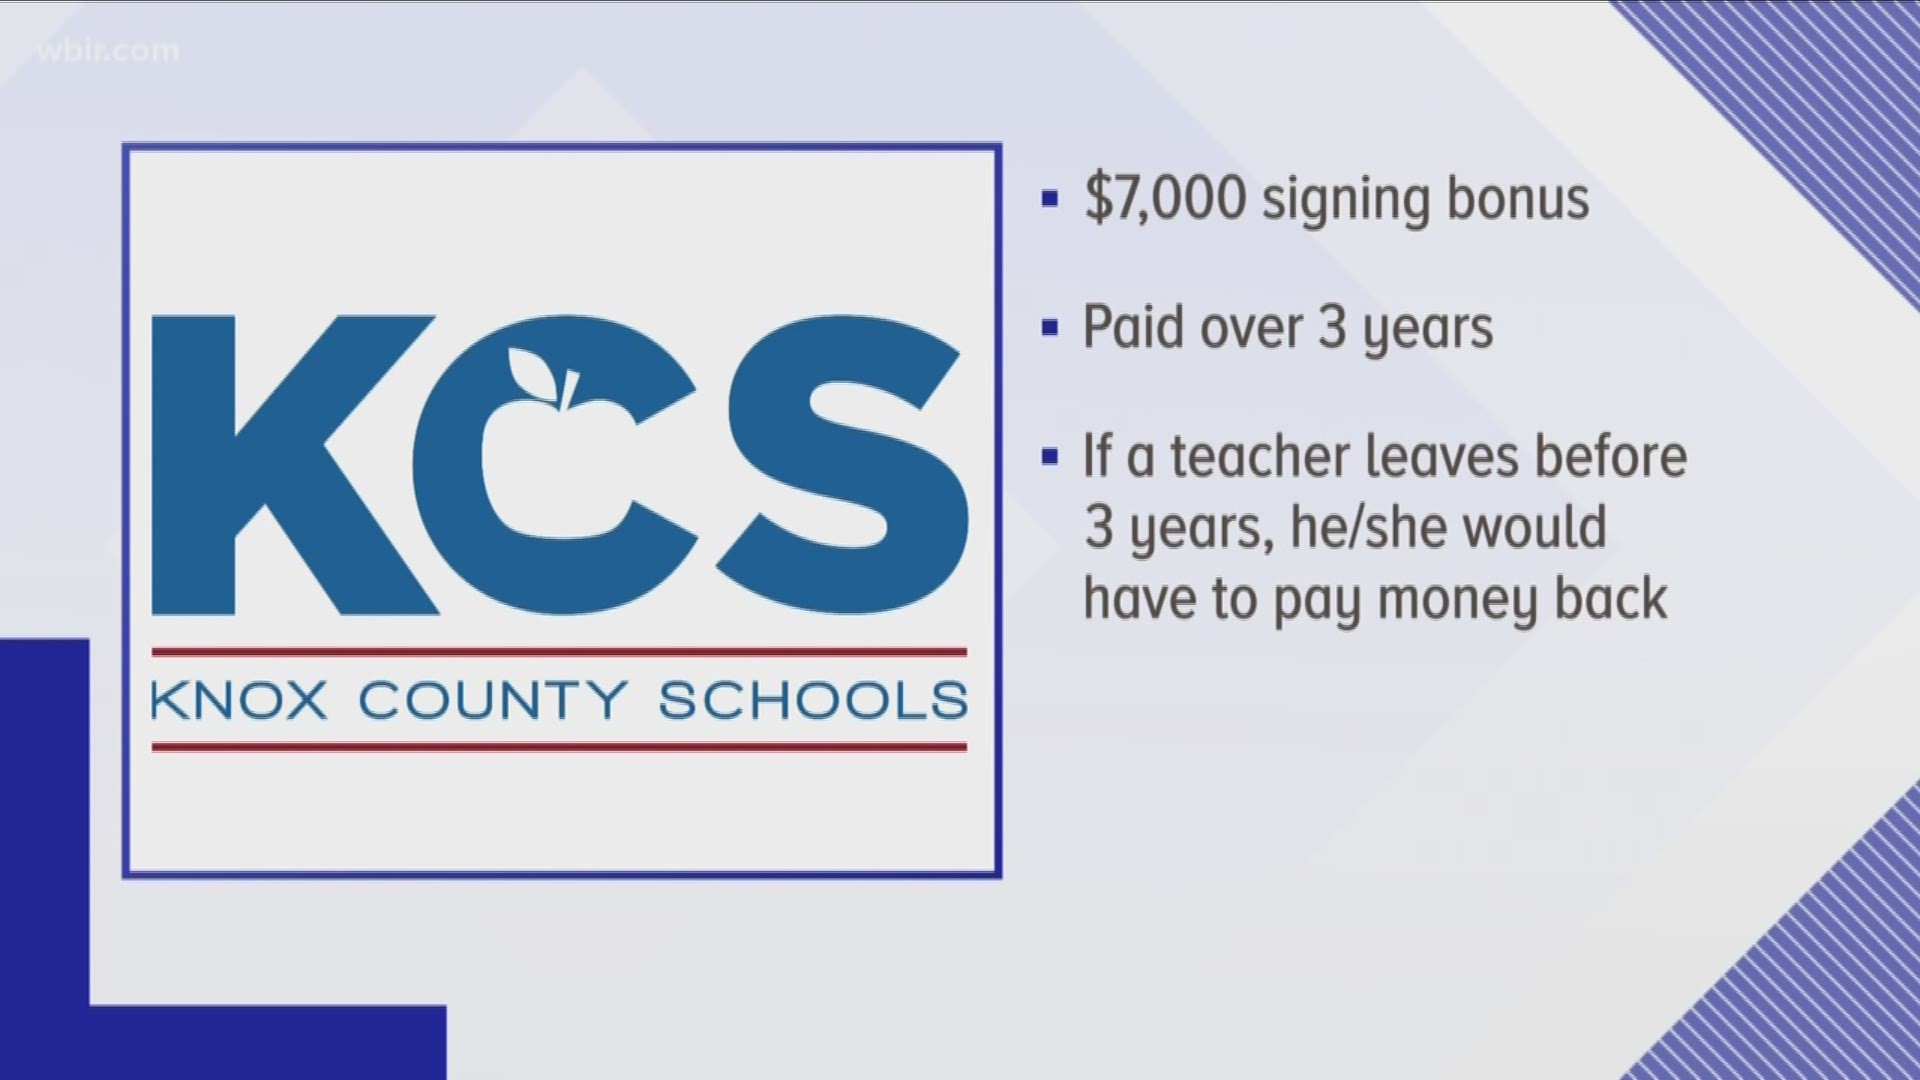 The plan would provide new special education hires with $7,000 over three years to stay with the school system.